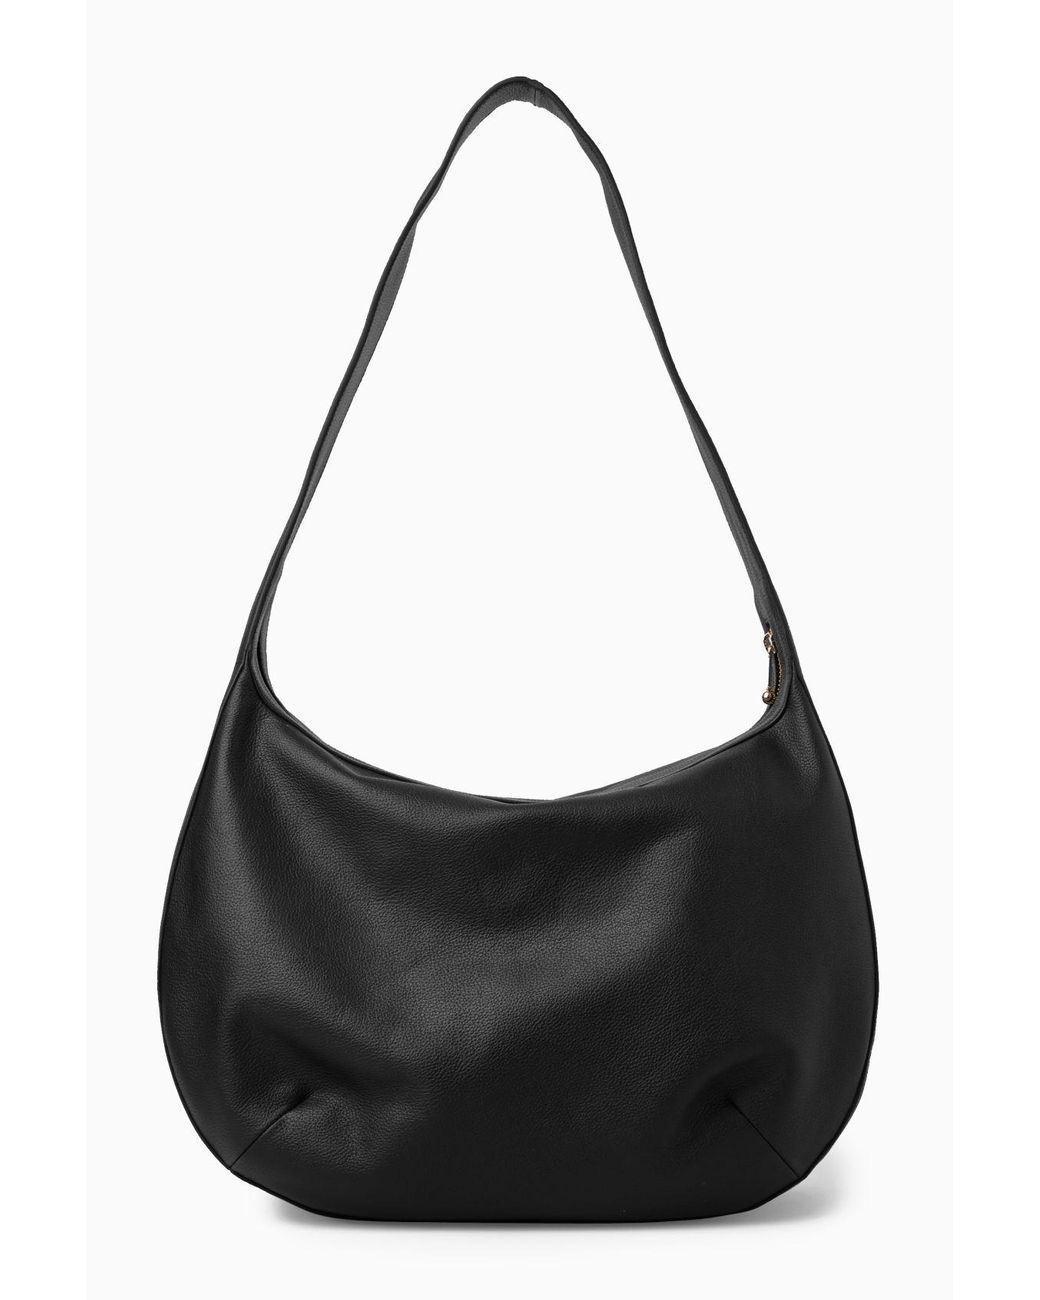 Women's Patent Leather Bag 